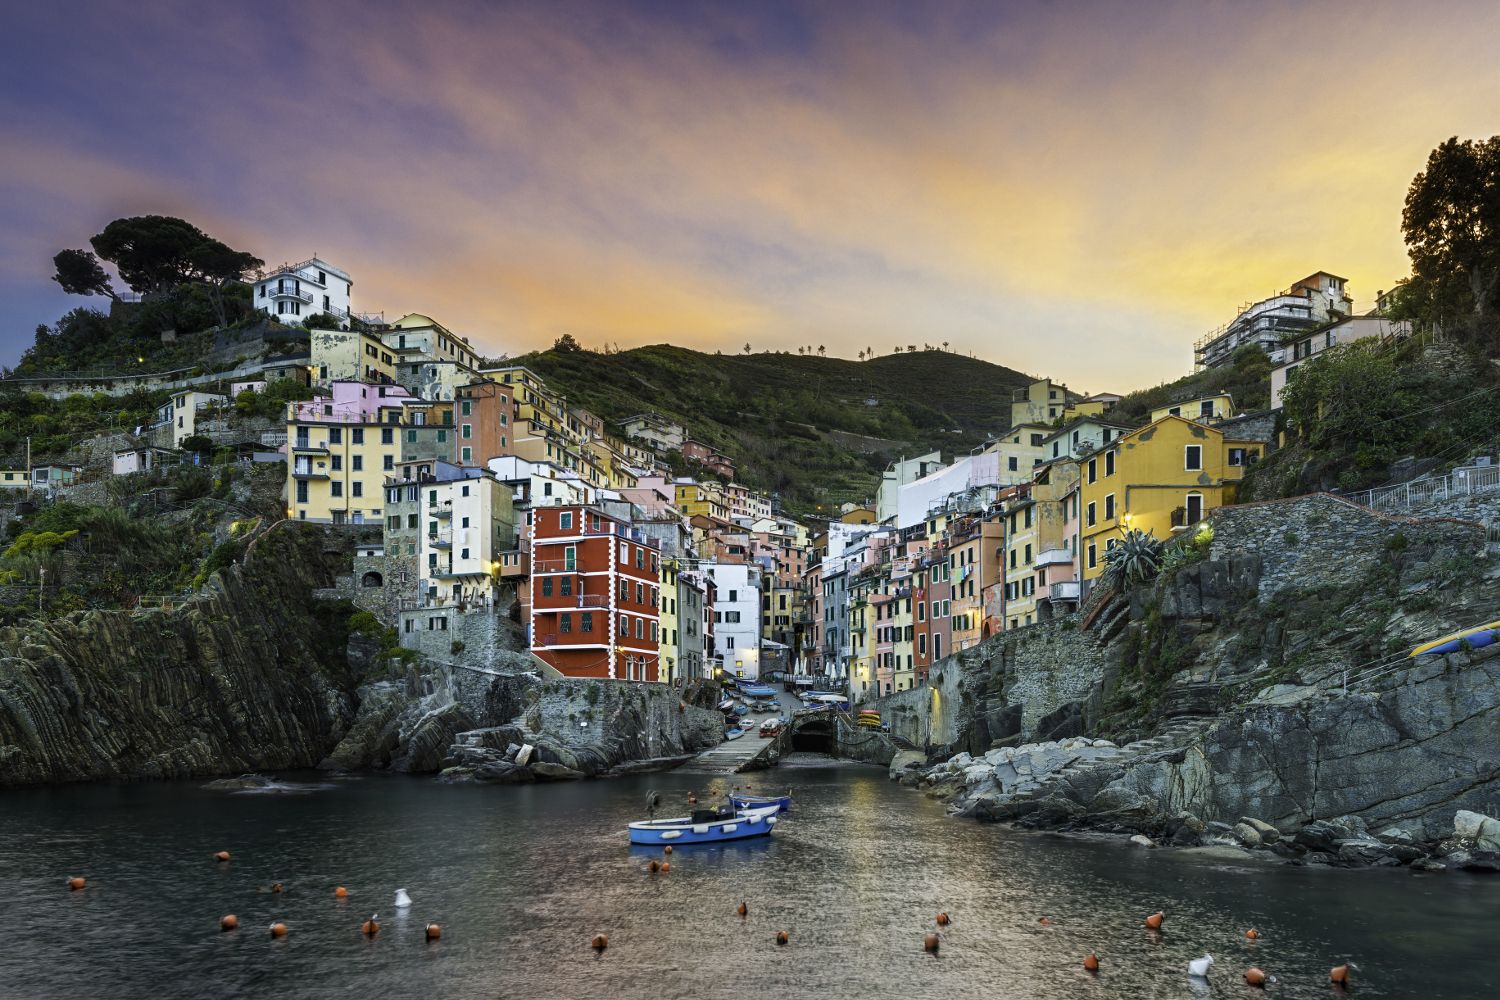 Italy's fabulous five: planning your visit to the Cinque Terre